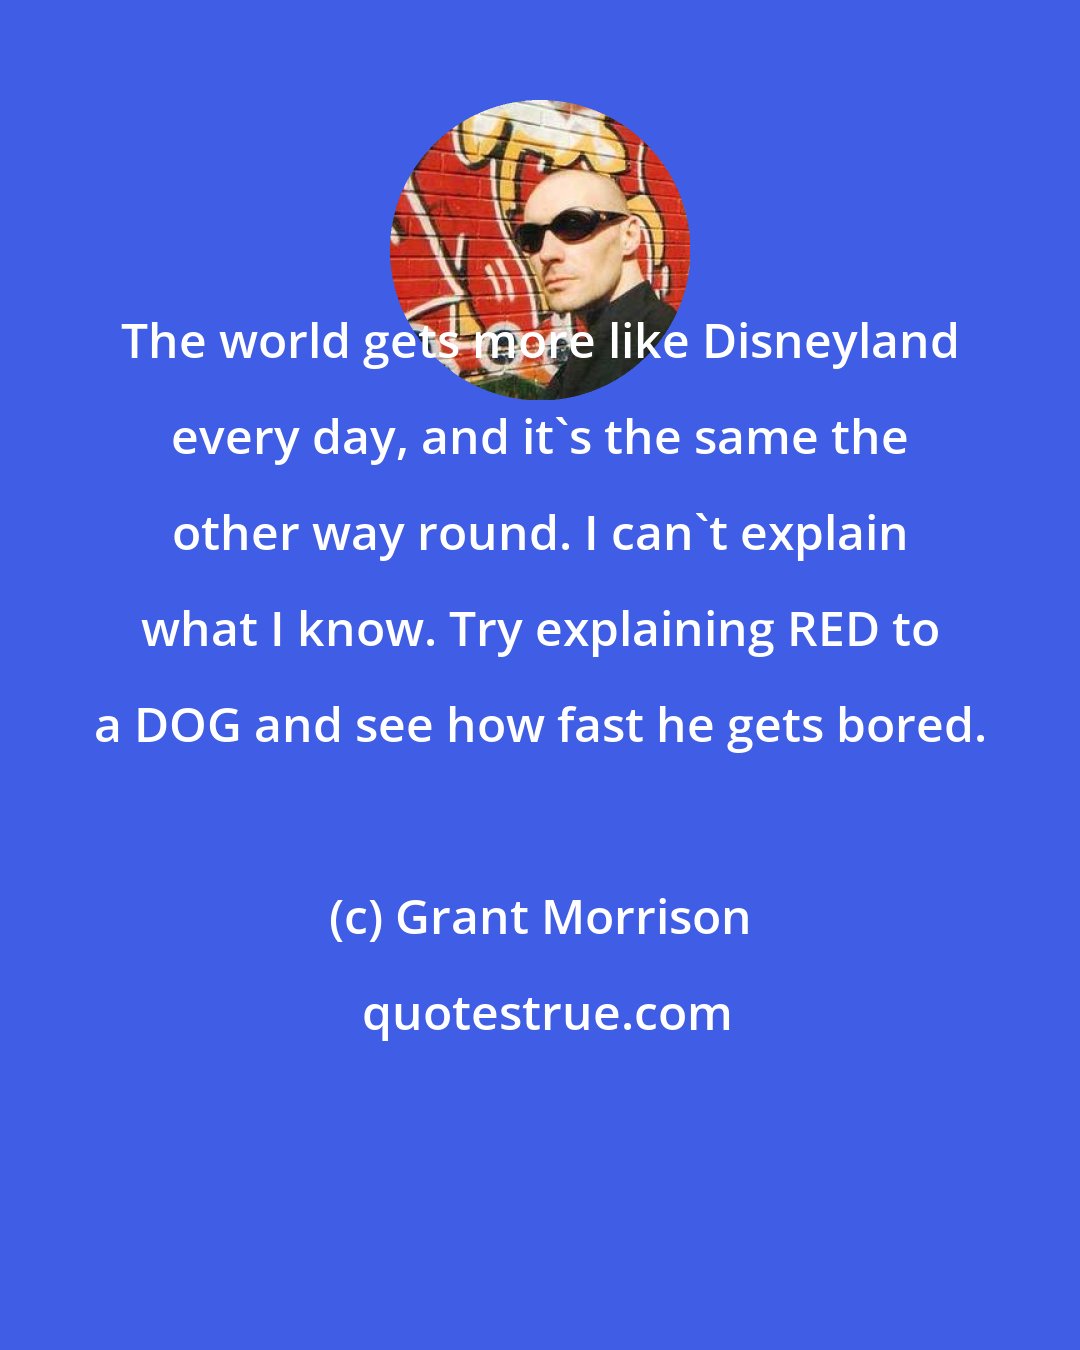 Grant Morrison: The world gets more like Disneyland every day, and it's the same the other way round. I can't explain what I know. Try explaining RED to a DOG and see how fast he gets bored.